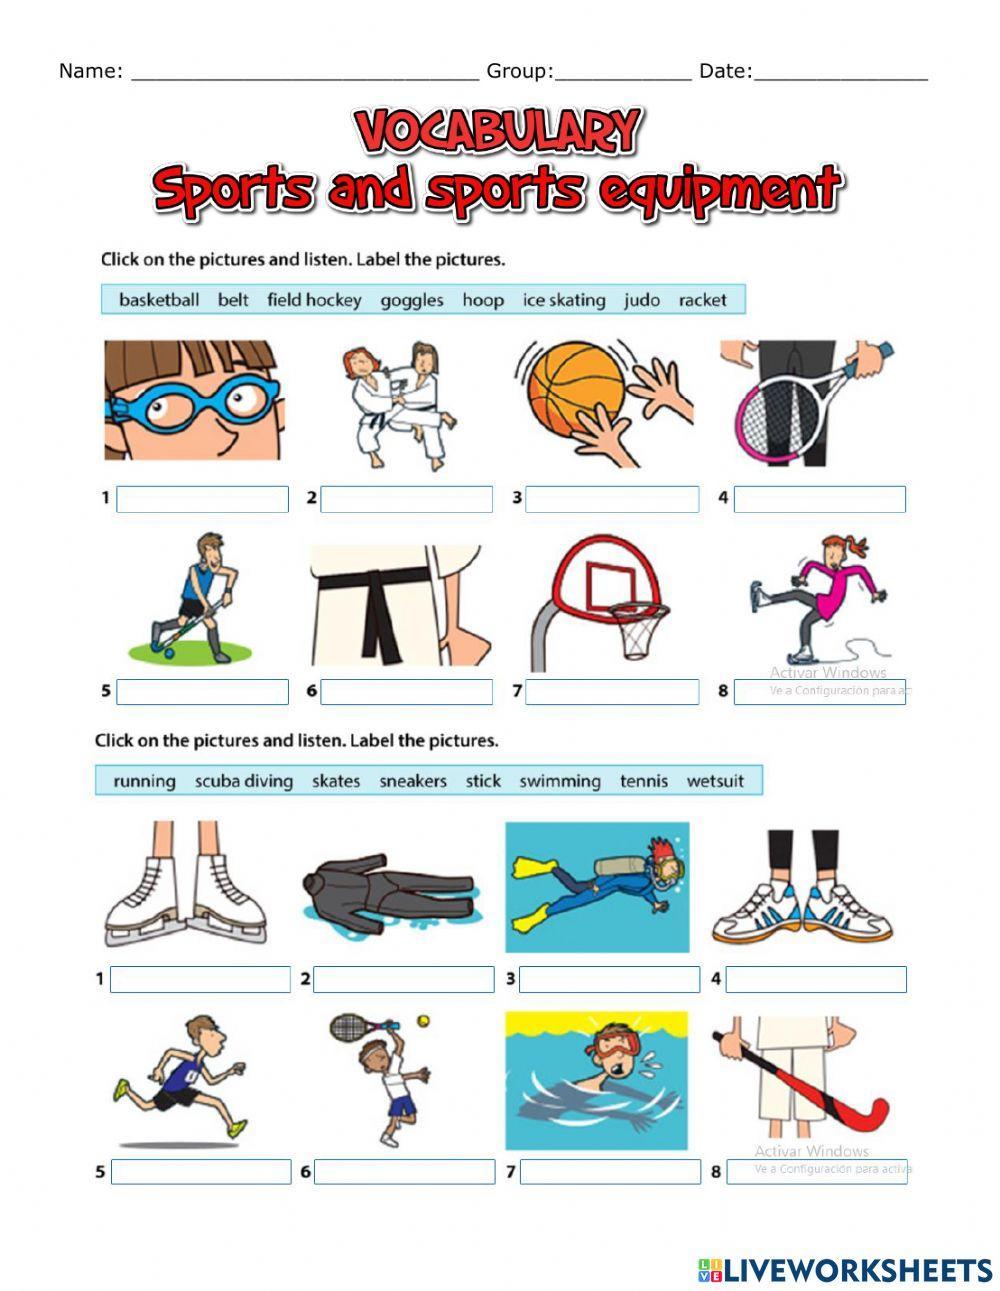 Sports and sports equipment